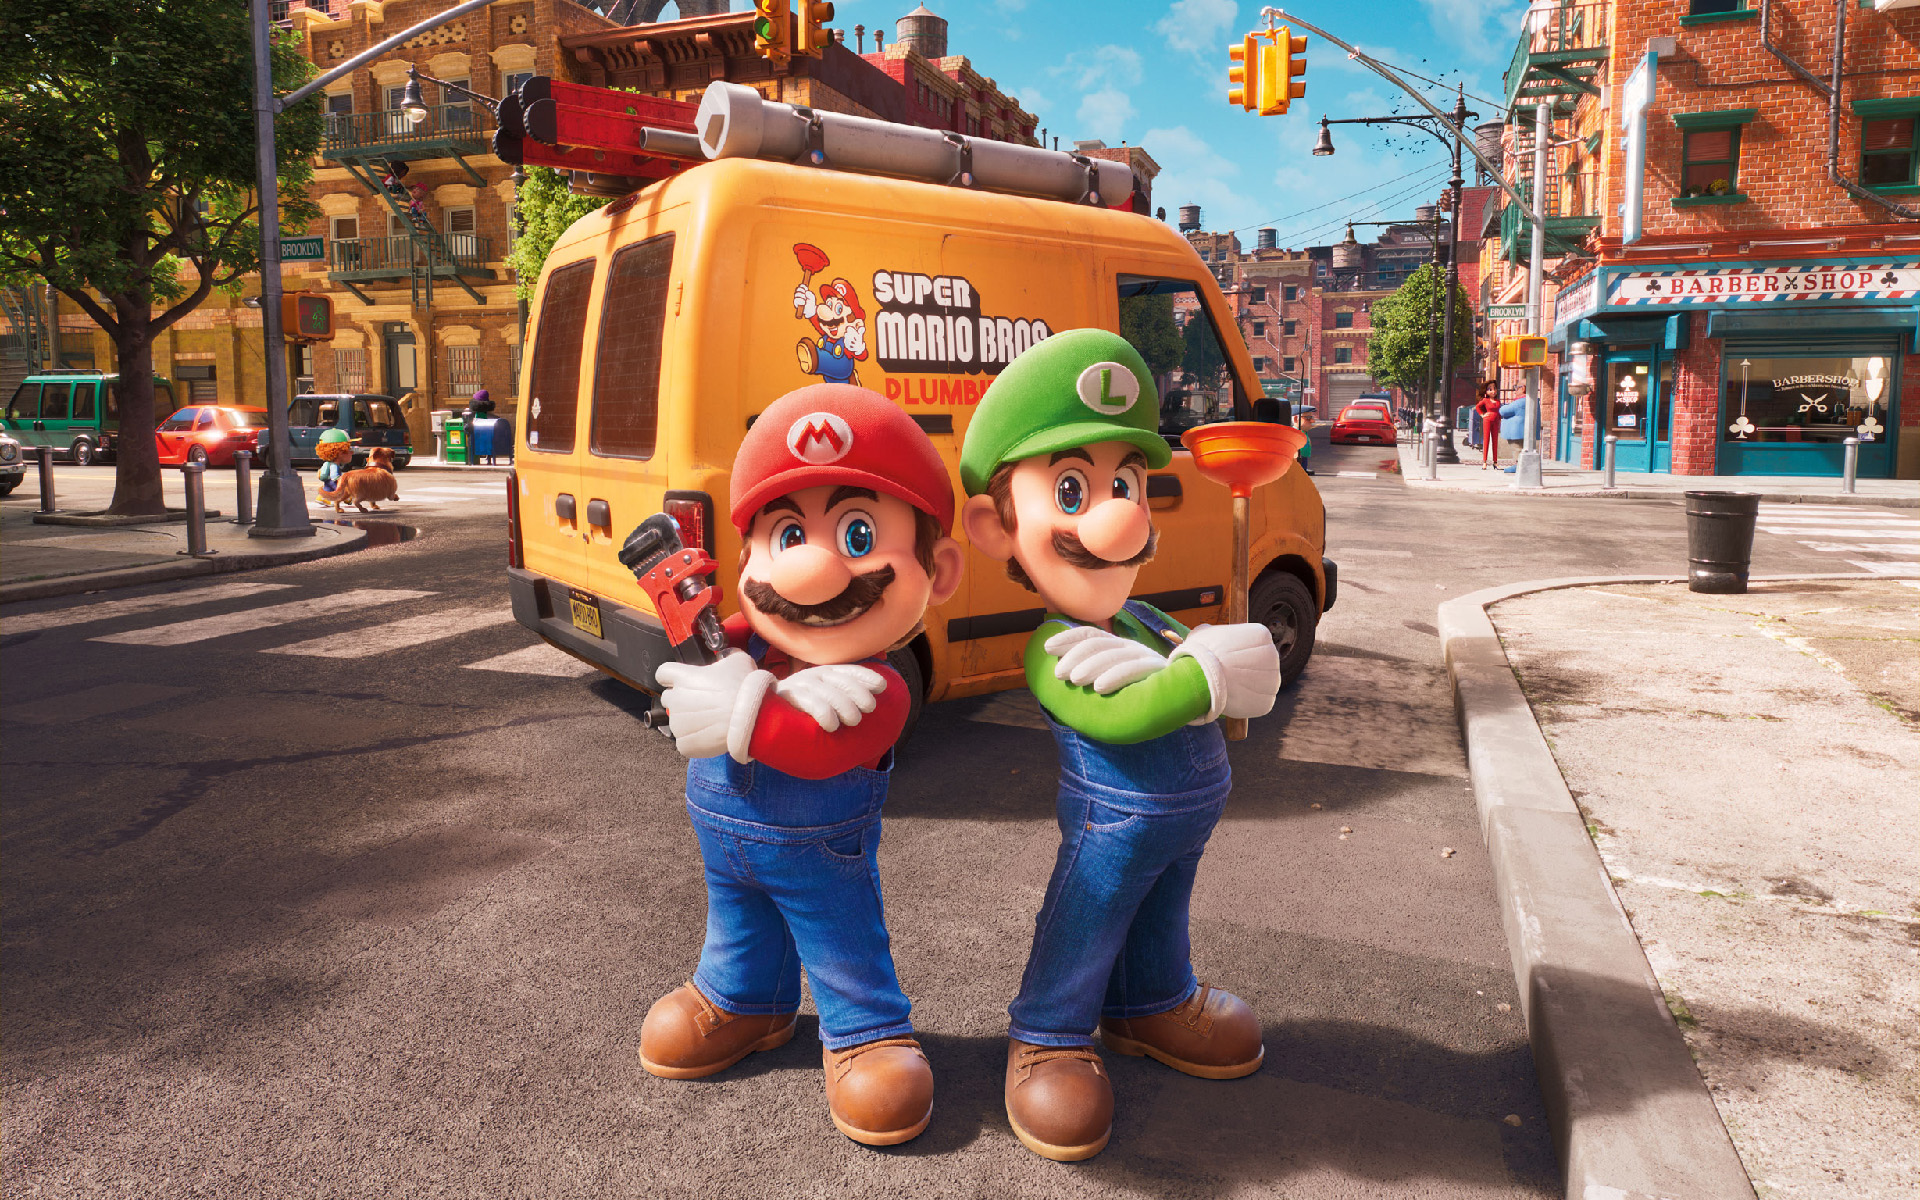 Mario, holding a wrench, and Luigi, holding a plunger, stand back to back in front of the Super Mario Bros. plumbing truck near a Brooklyn intersection in artwork from the Super Mario Bros. Movie.